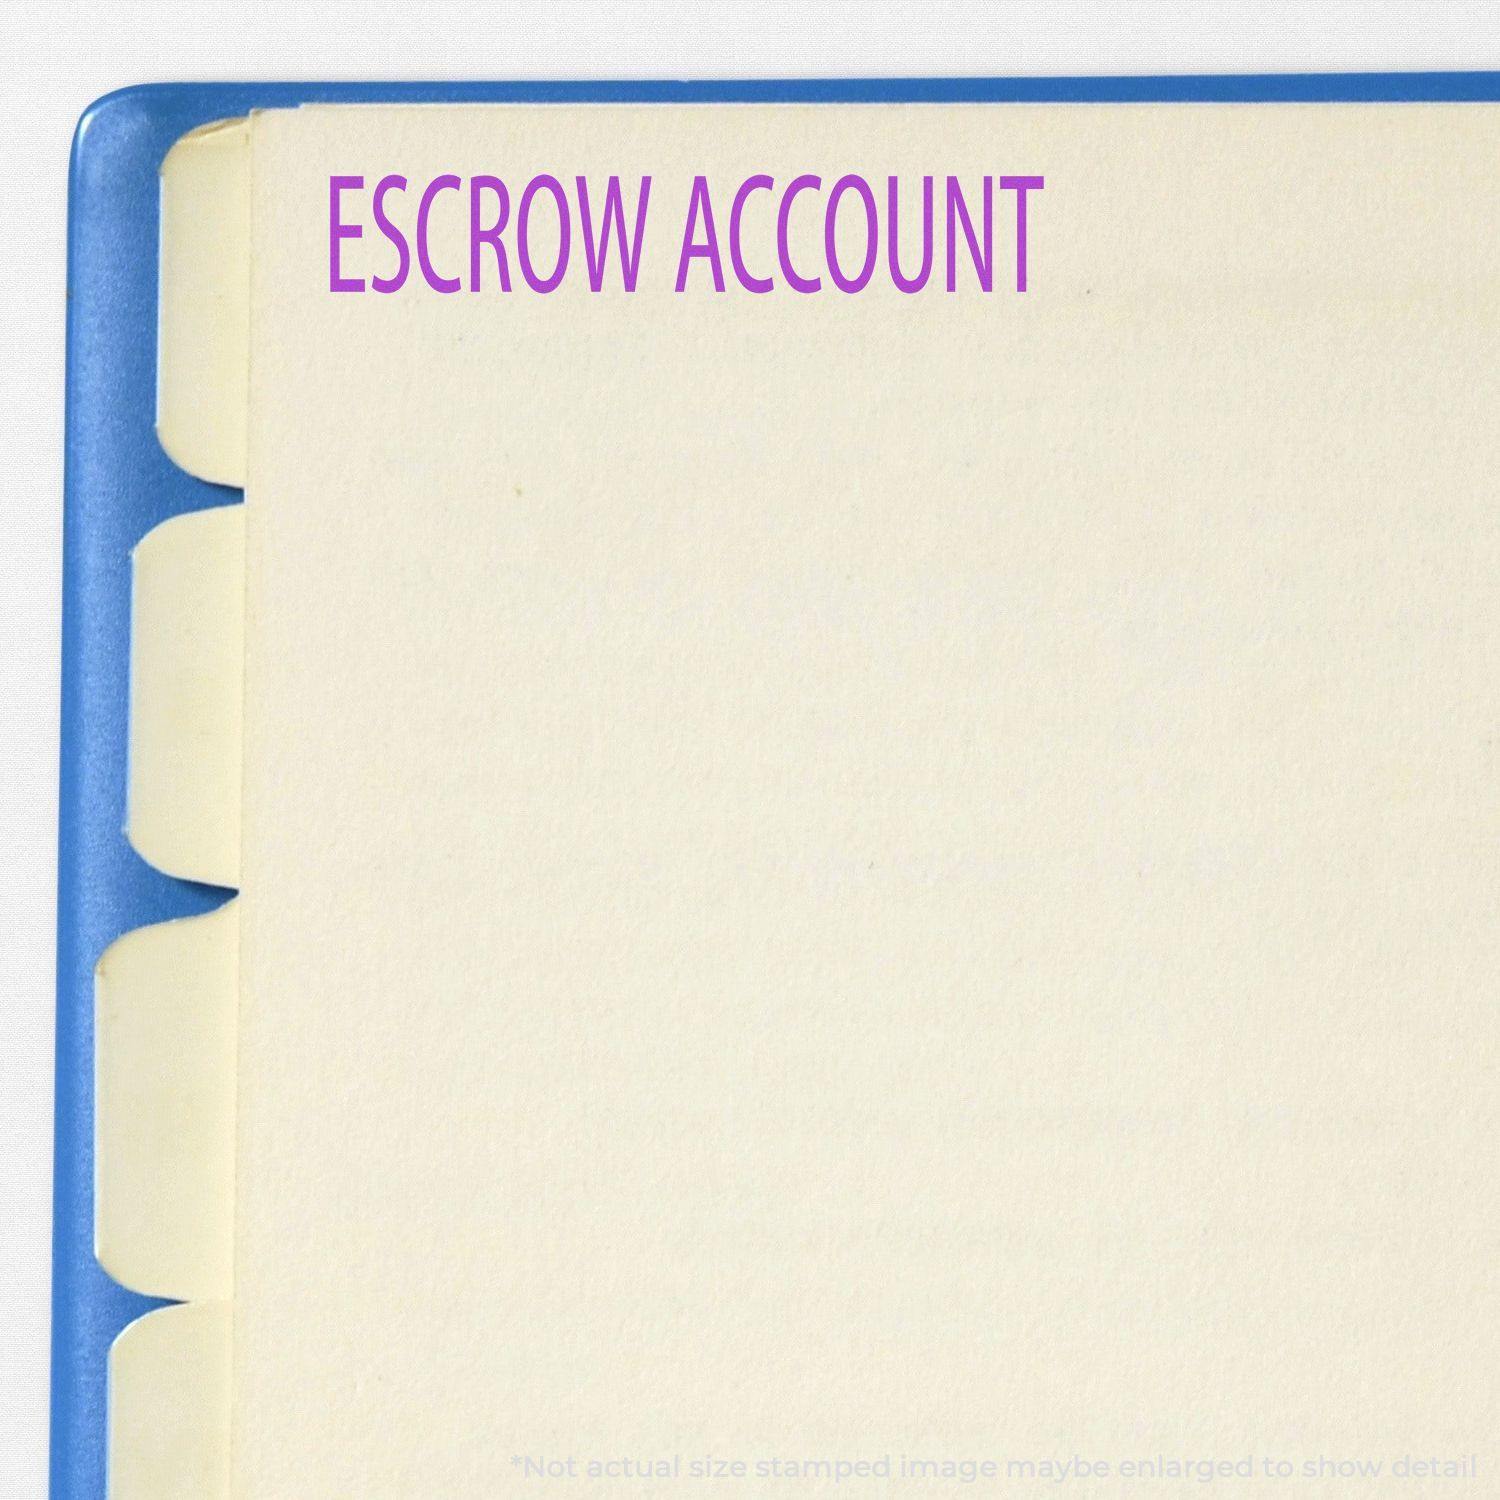 A stock office pre-inked stamp with a stamped image showing how the text "ESCROW ACCOUNT" is displayed after stamping.